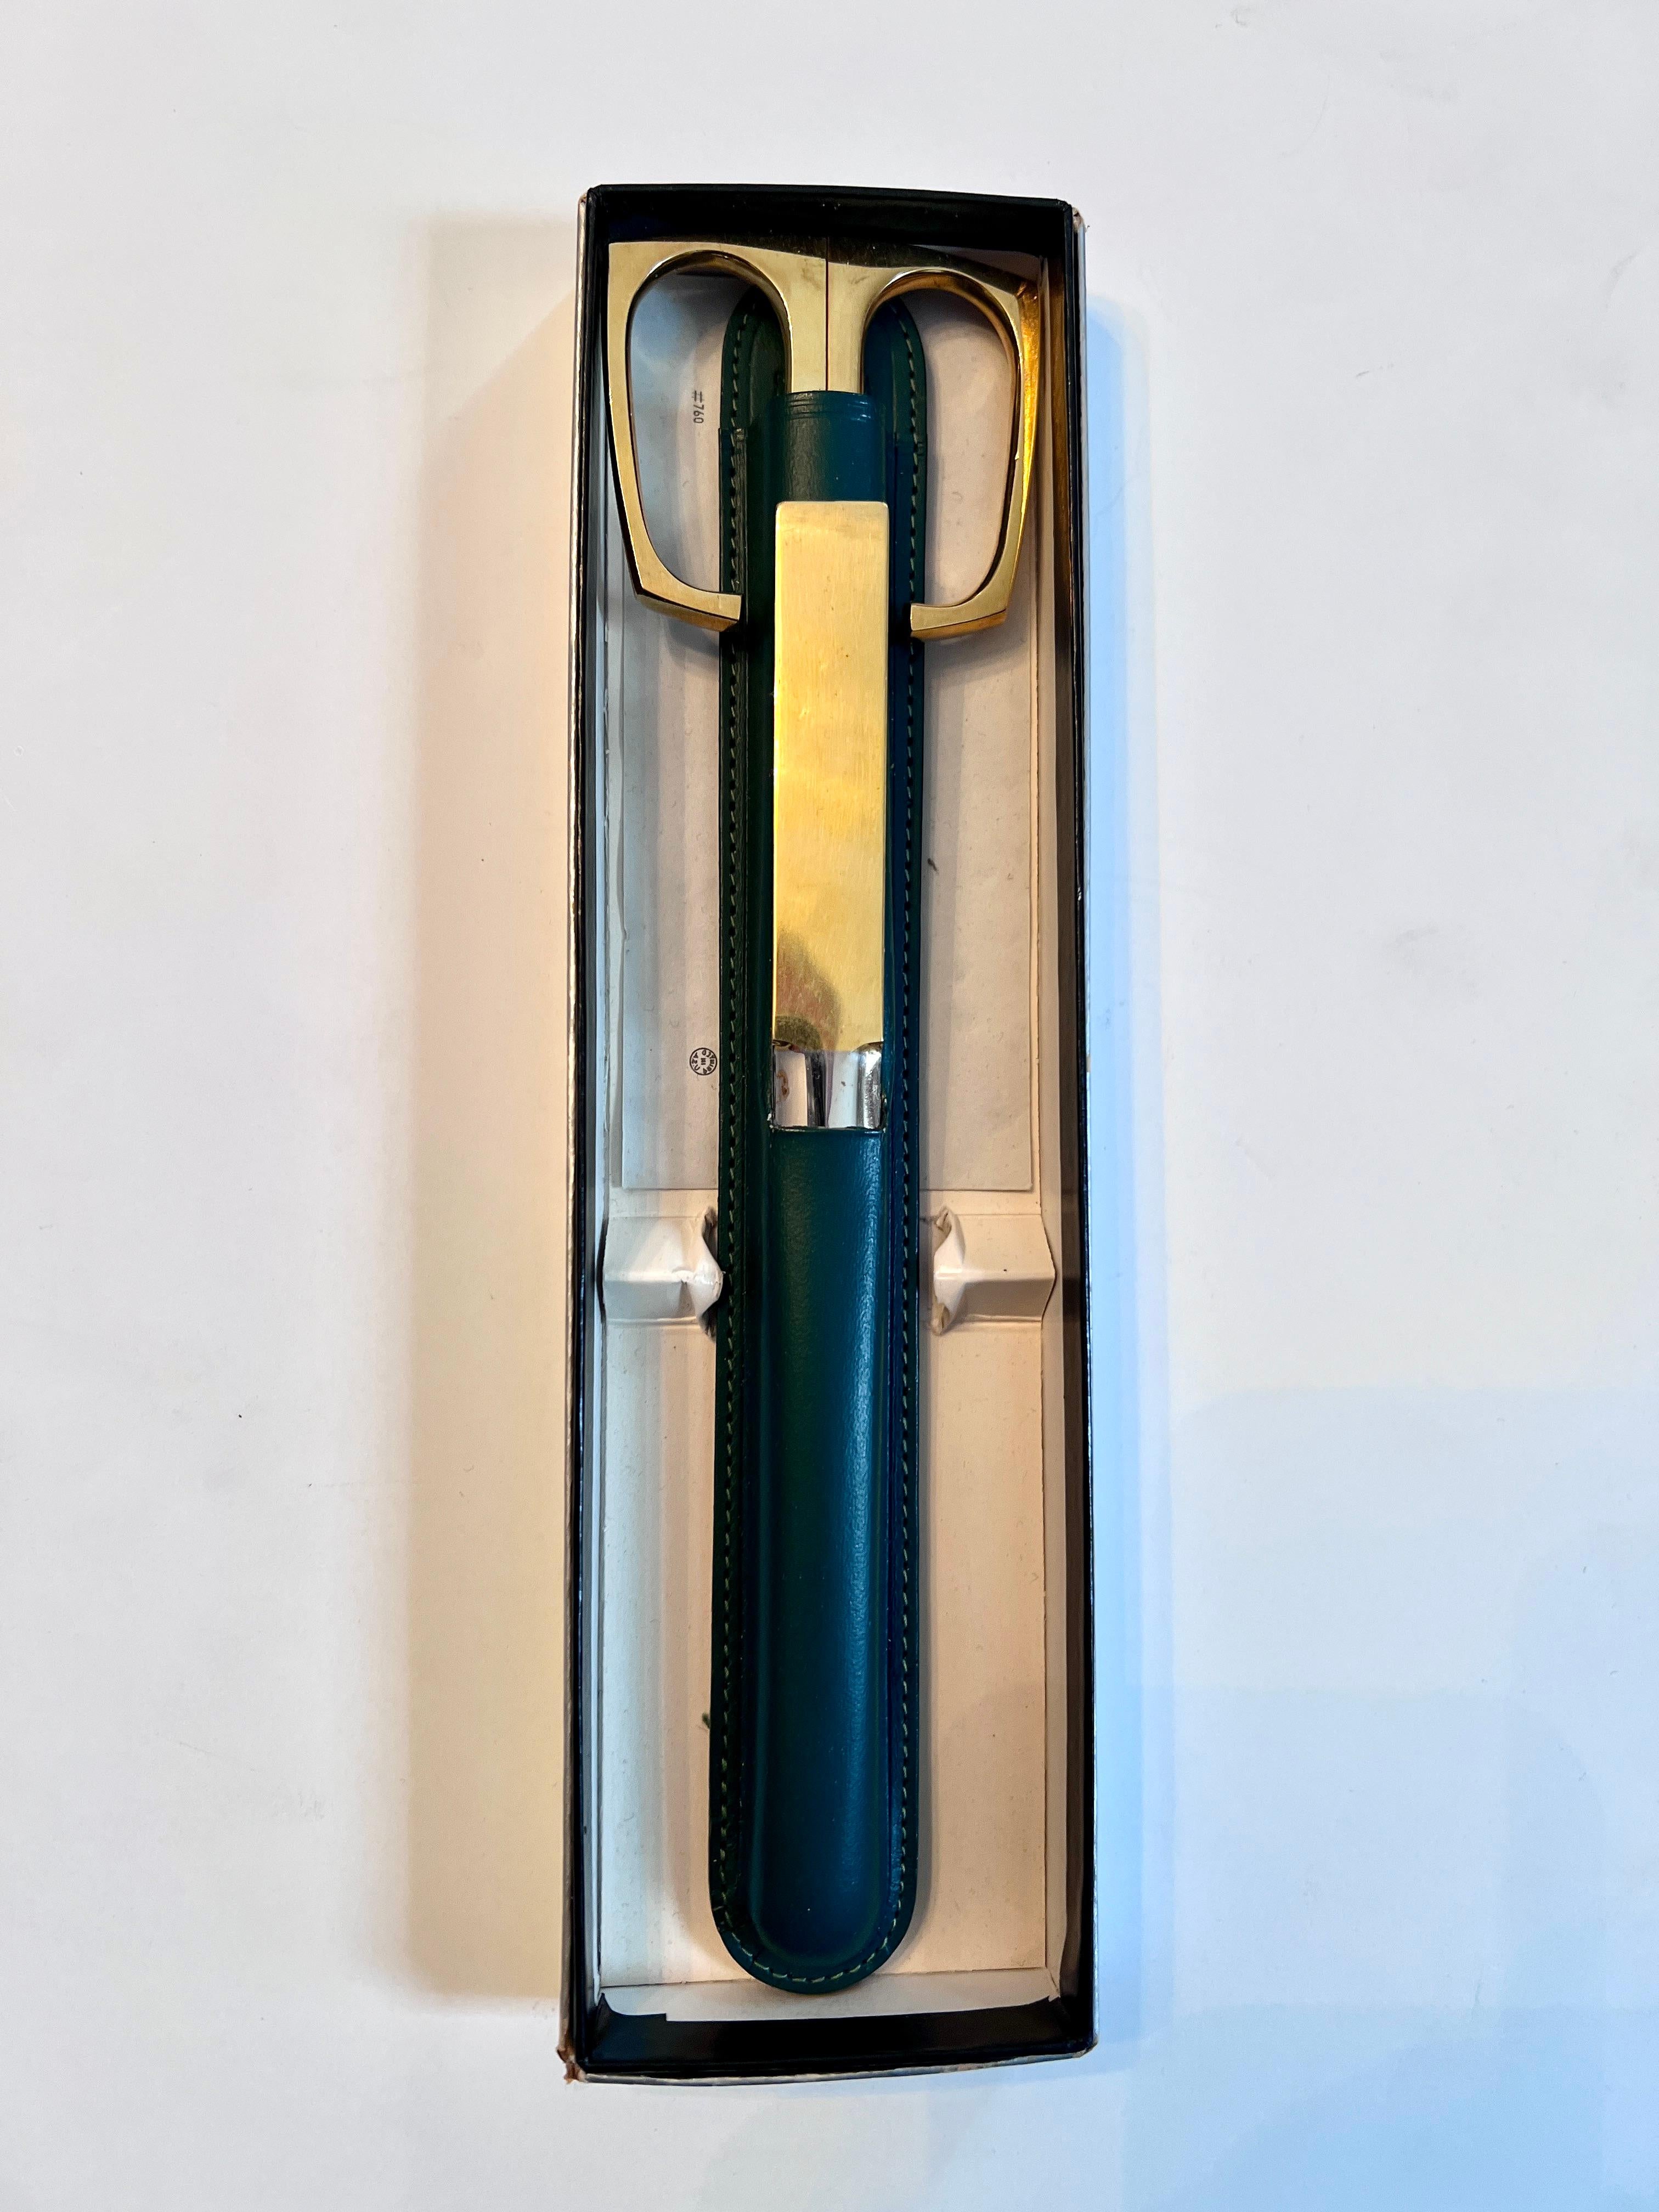 Italian-made hot-dropped forged steel plated in Nickel and Brass are used to make the scissors and letter opener. The green leather case is marked Solingen Germany. 

